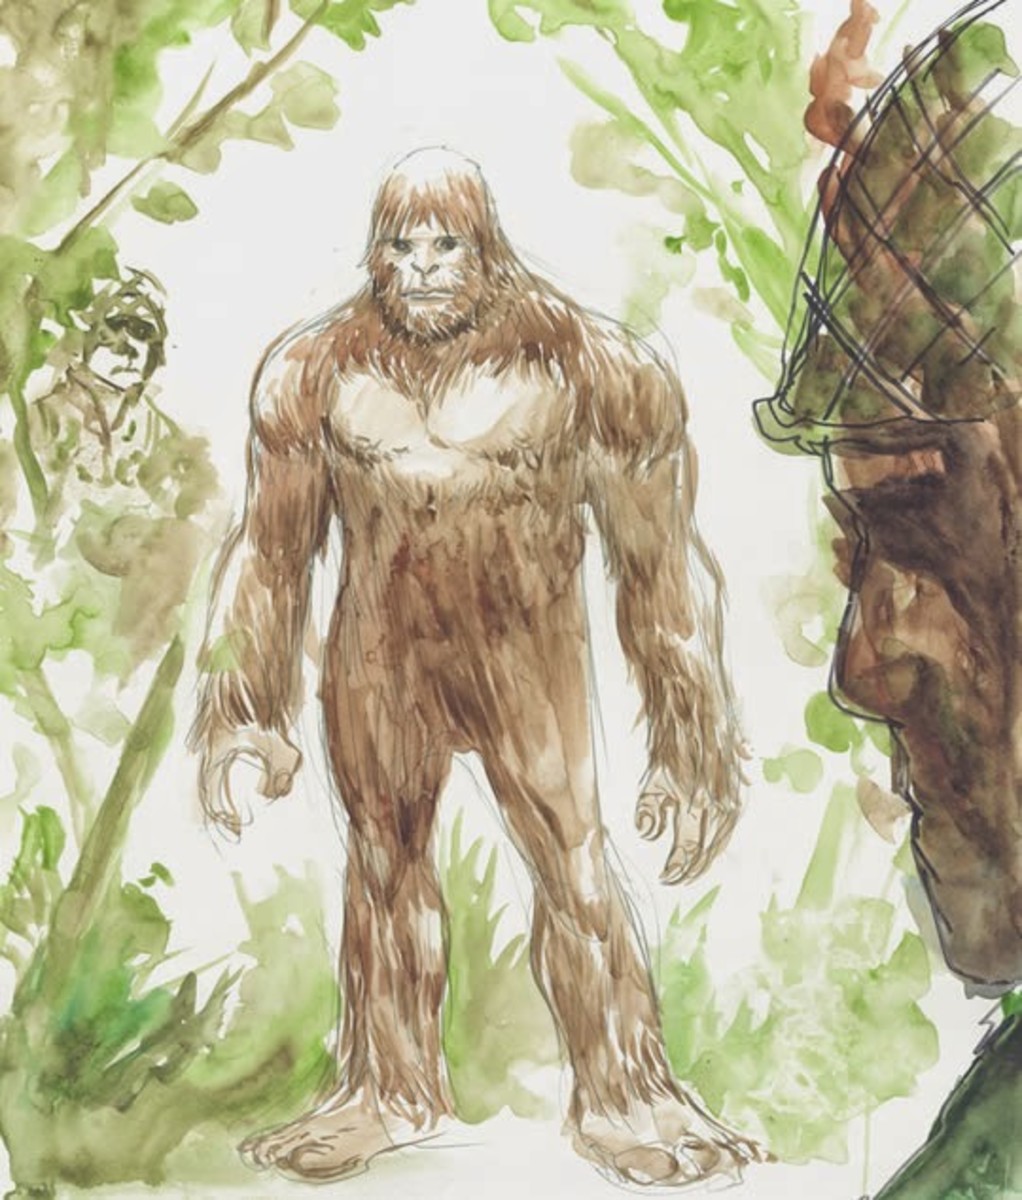 Drawing of a rock ape